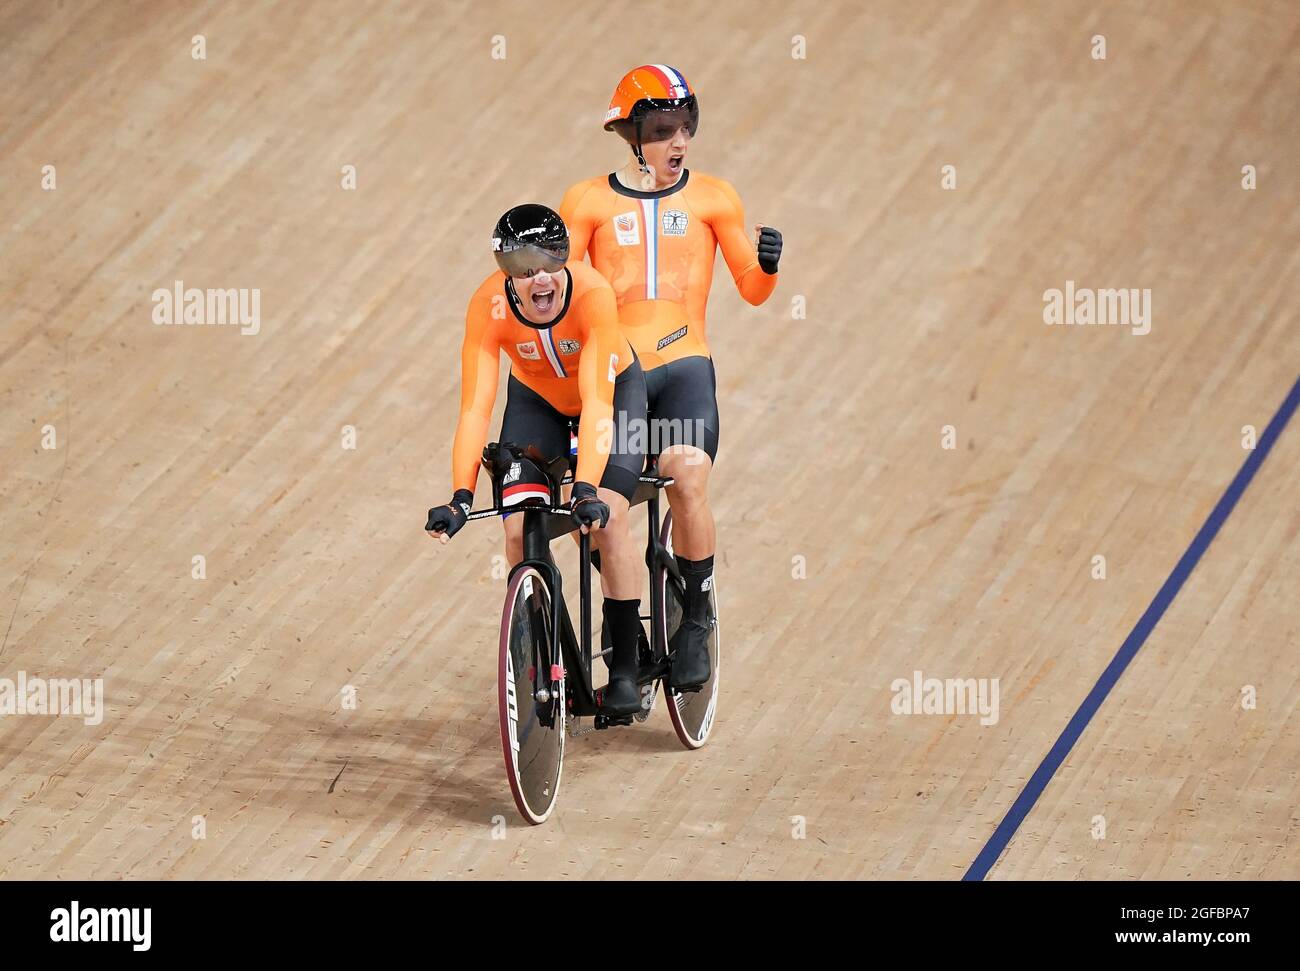 Netherland’s Tristan Bangma and pilot Patrick Bos in action in the Men's Class B 4000m Individual Pursuit qualifying during the Track Cycling at the Izu Velodrome on day one of the Tokyo 2020 Paralympic Games in Japan. Picture date: Wednesday August 25, 2021. Stock Photo